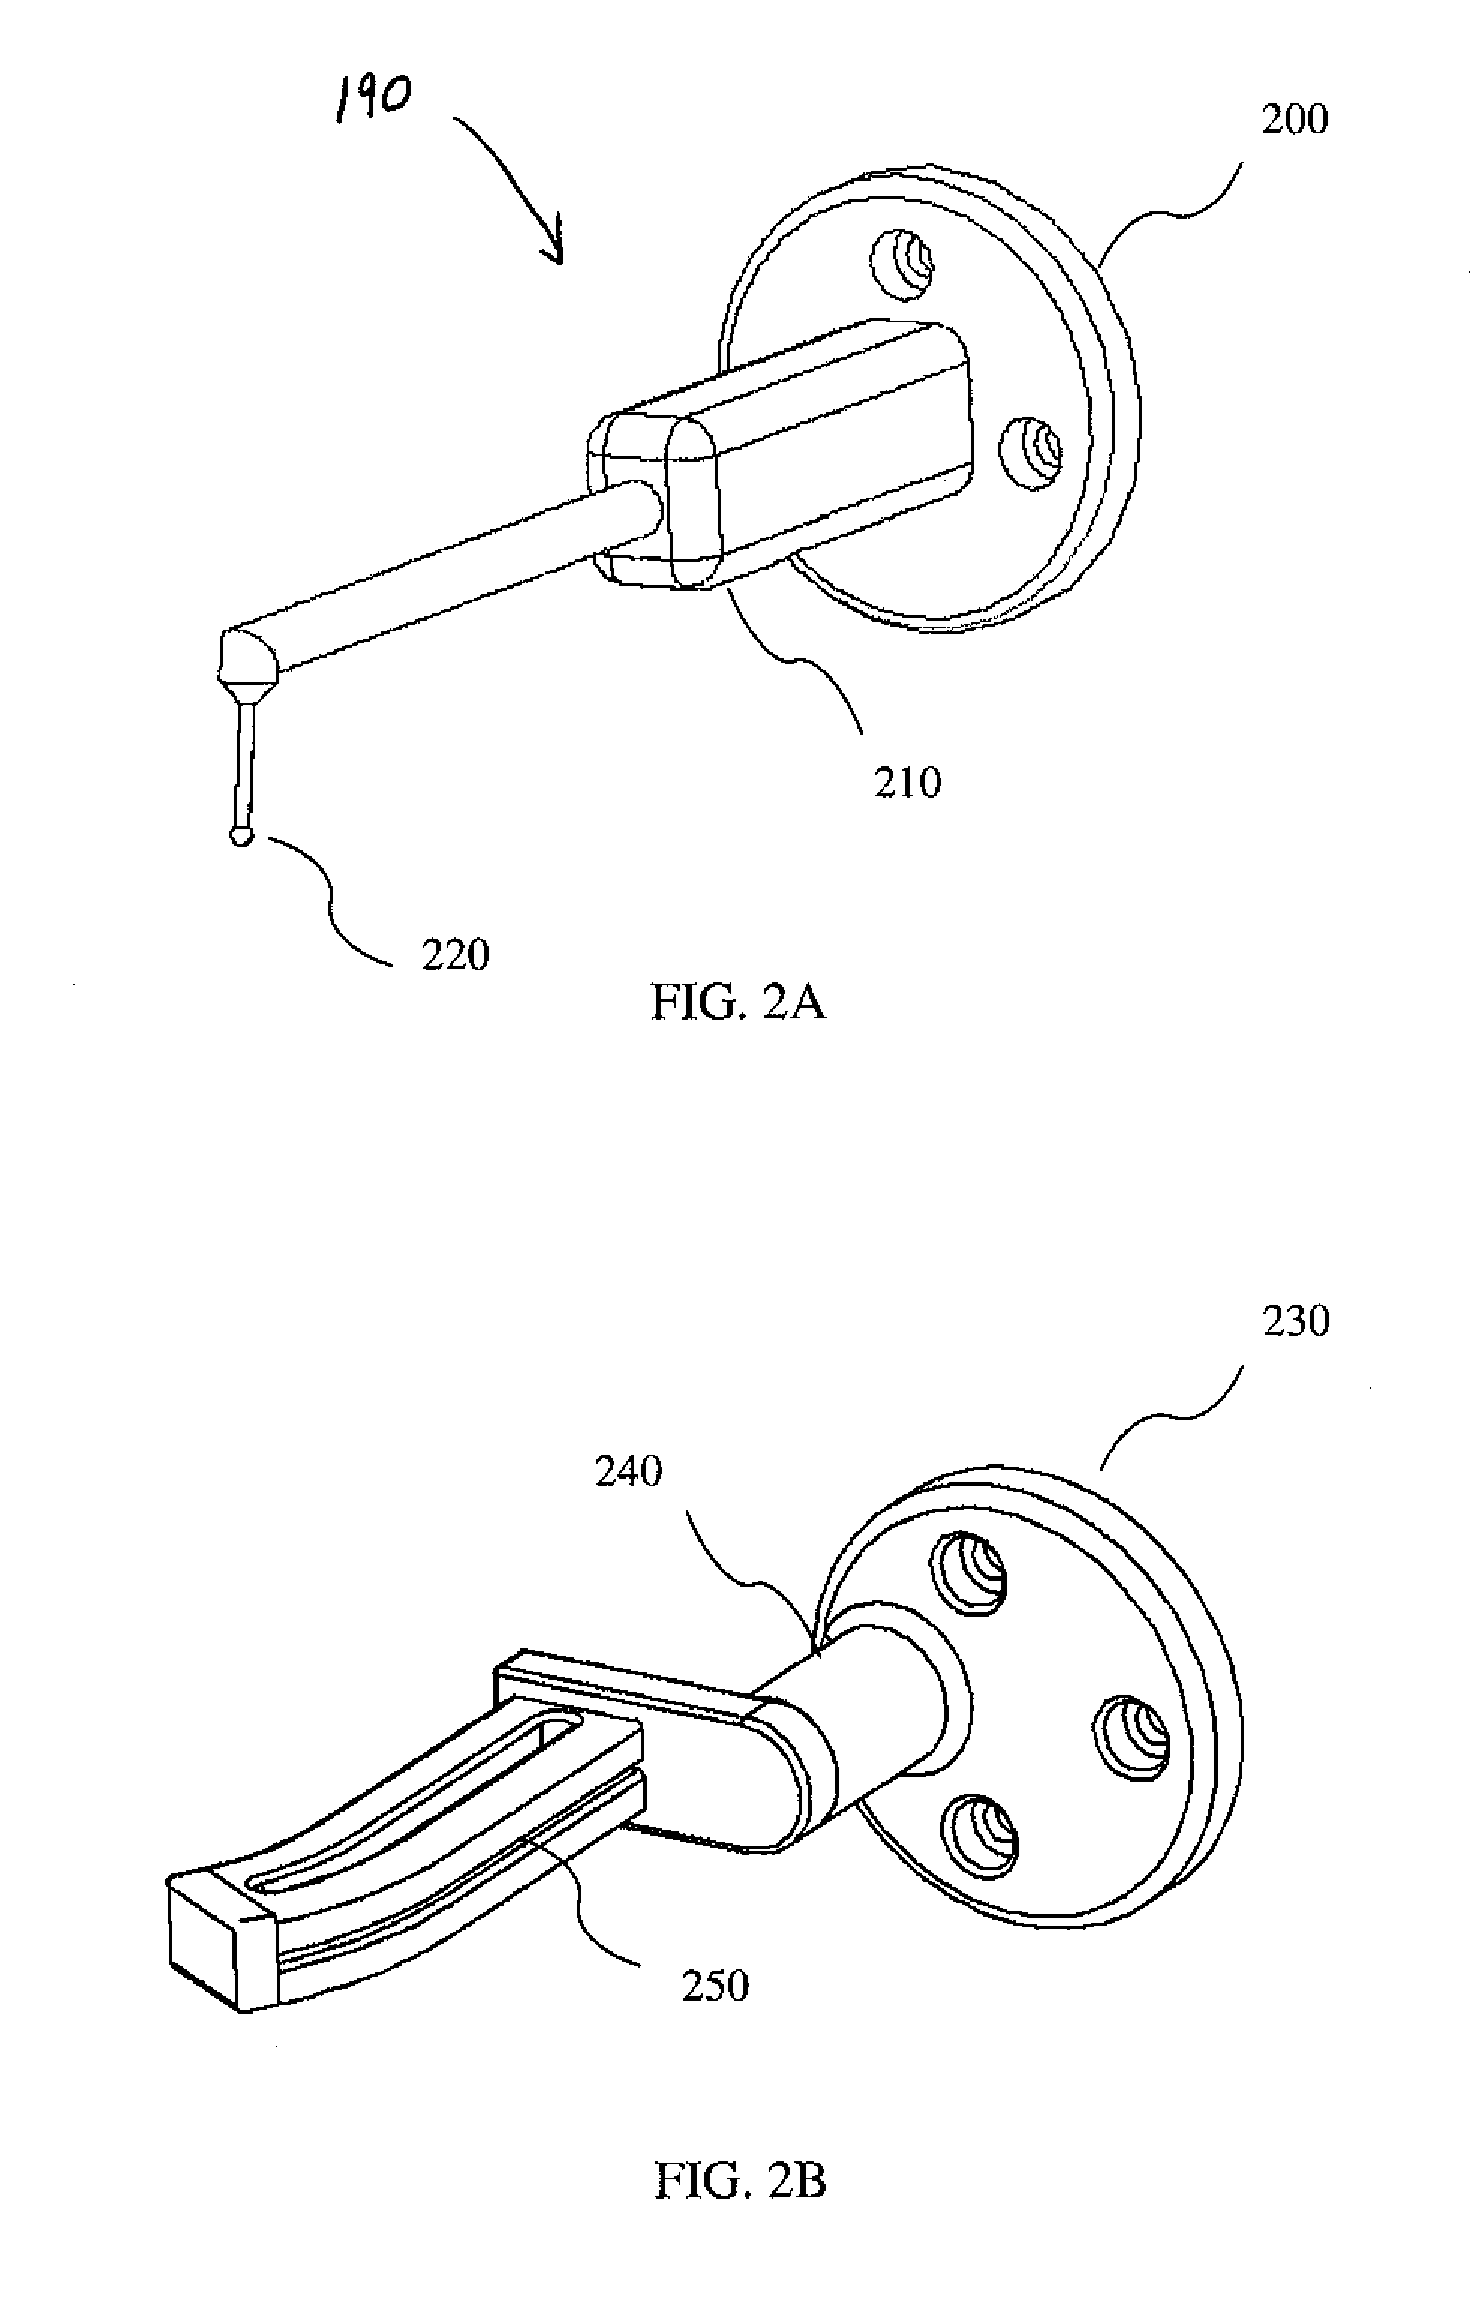 Imageless robotized device and method for surgical tool guidance